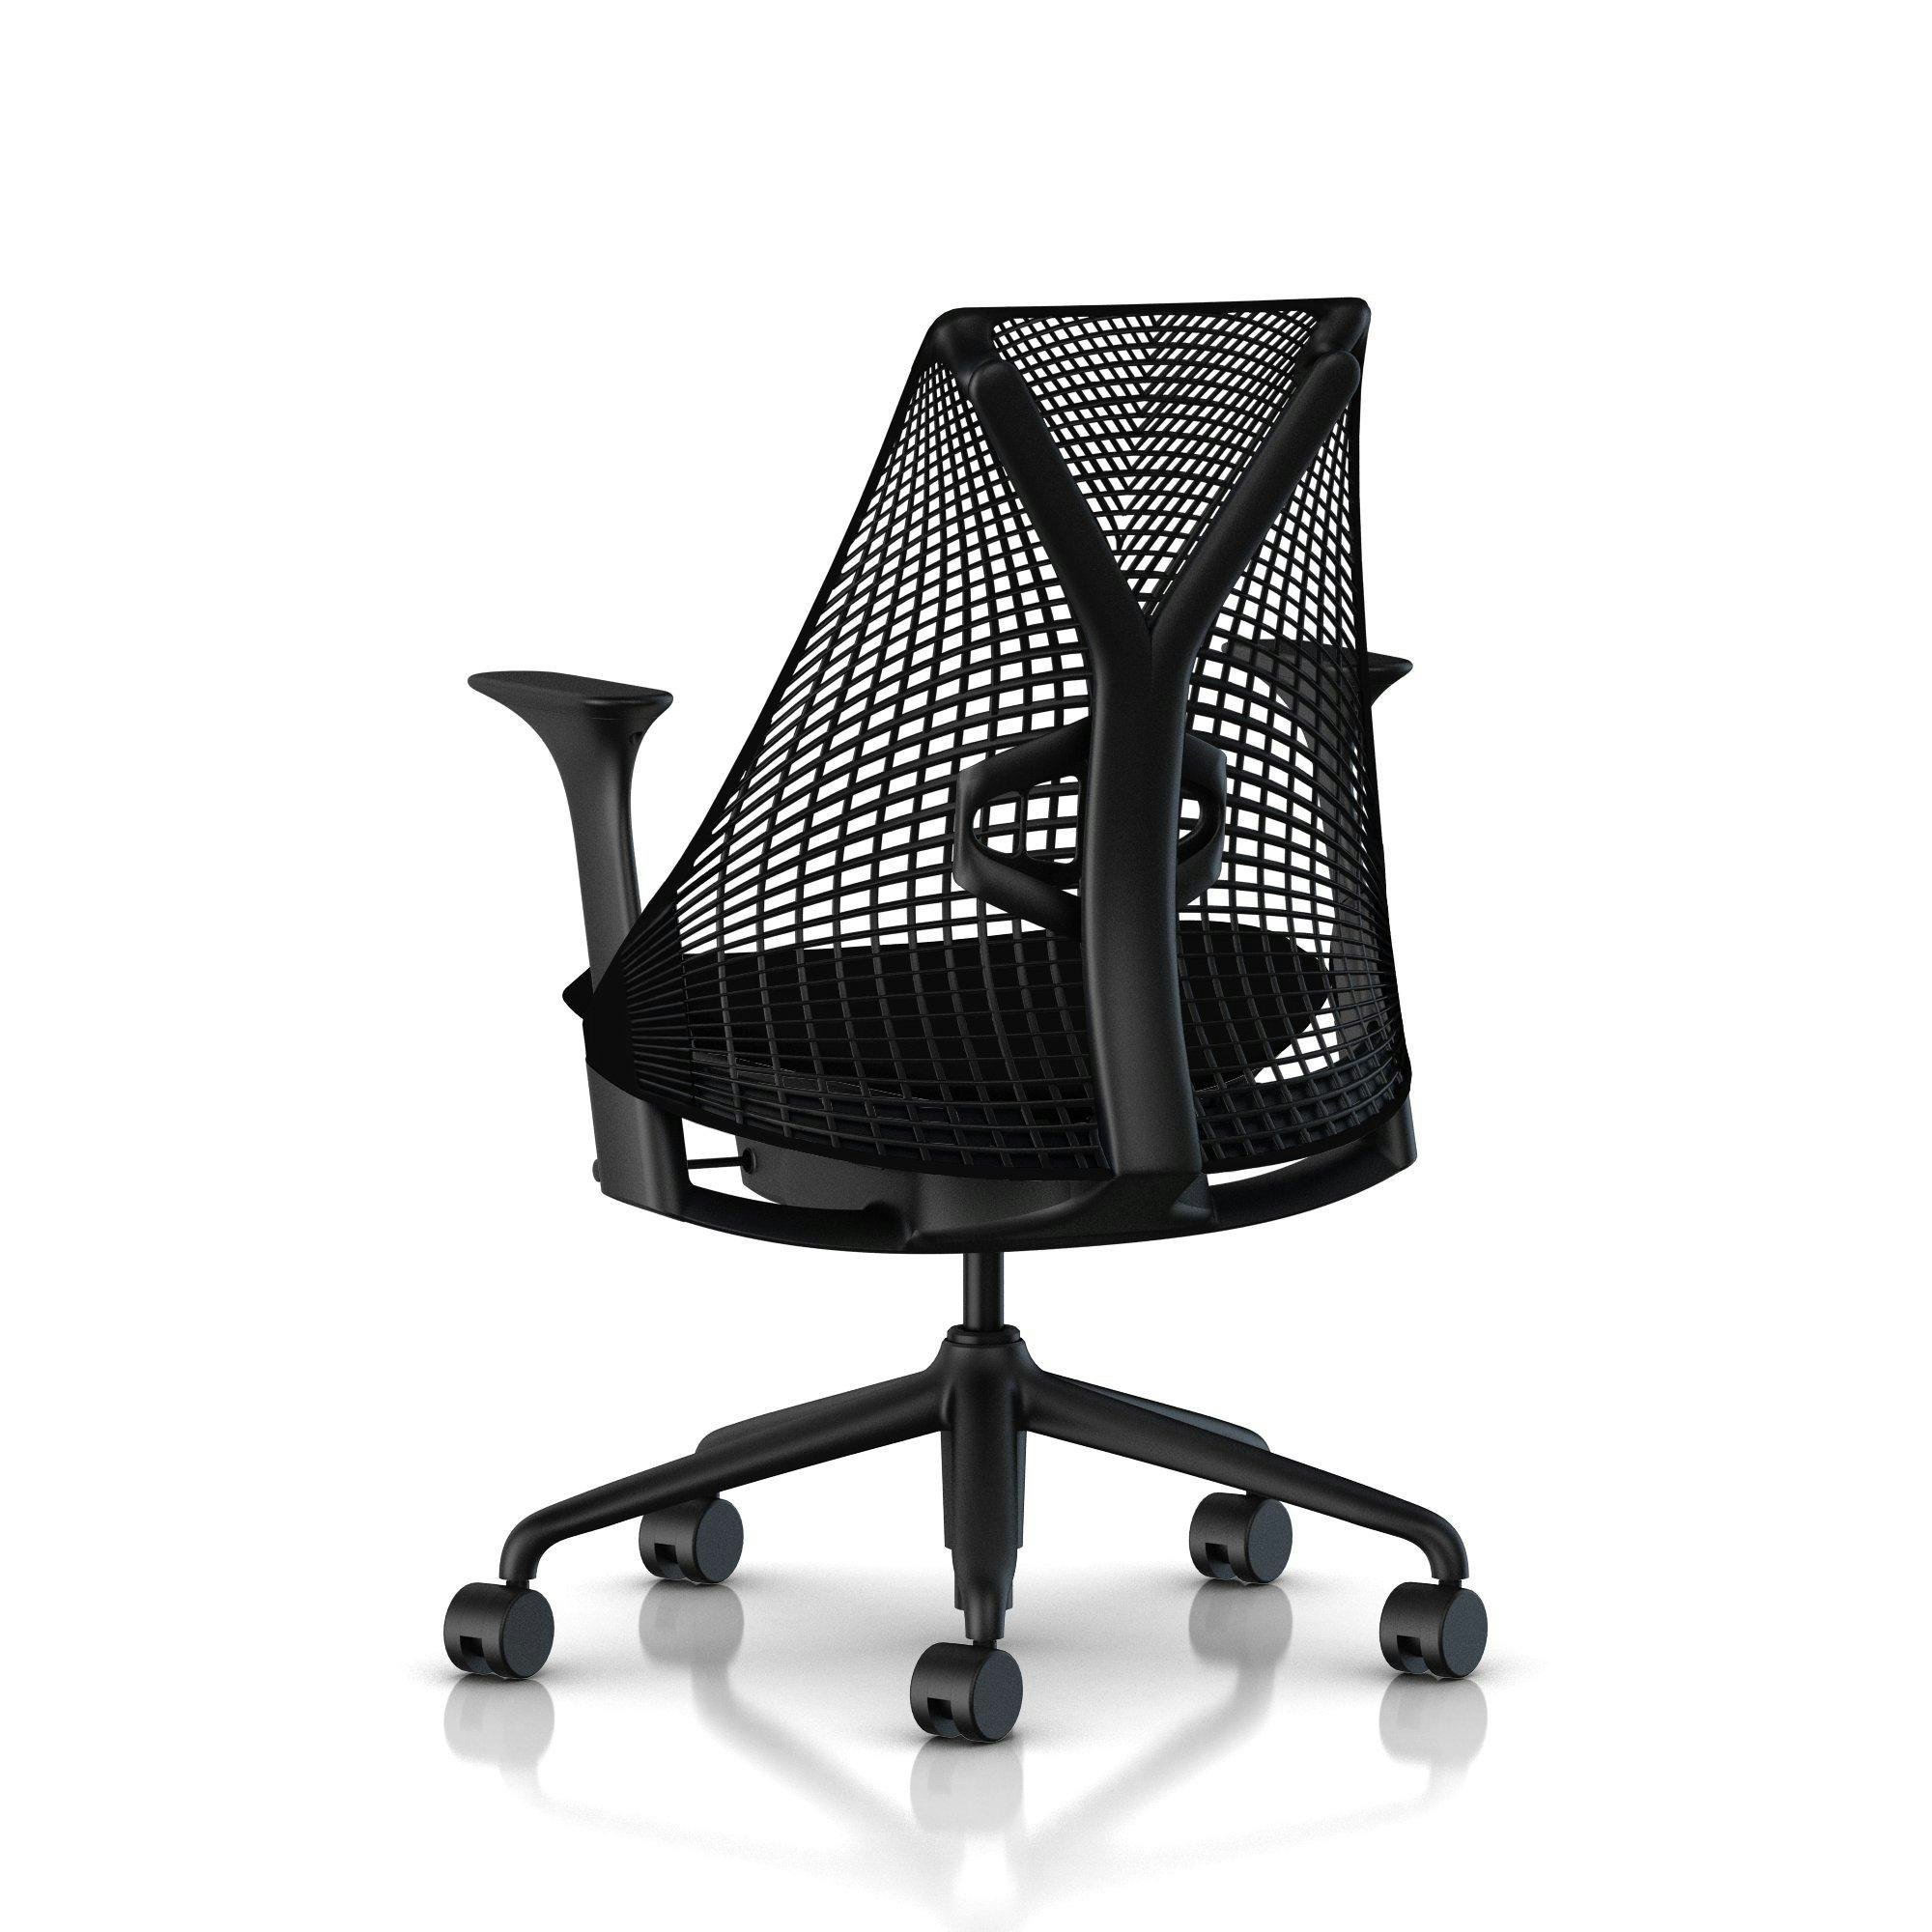 lumbar Support Herman Miller Authentic Herman Miller® Sayl® Task Chair No Wear Or Tear 